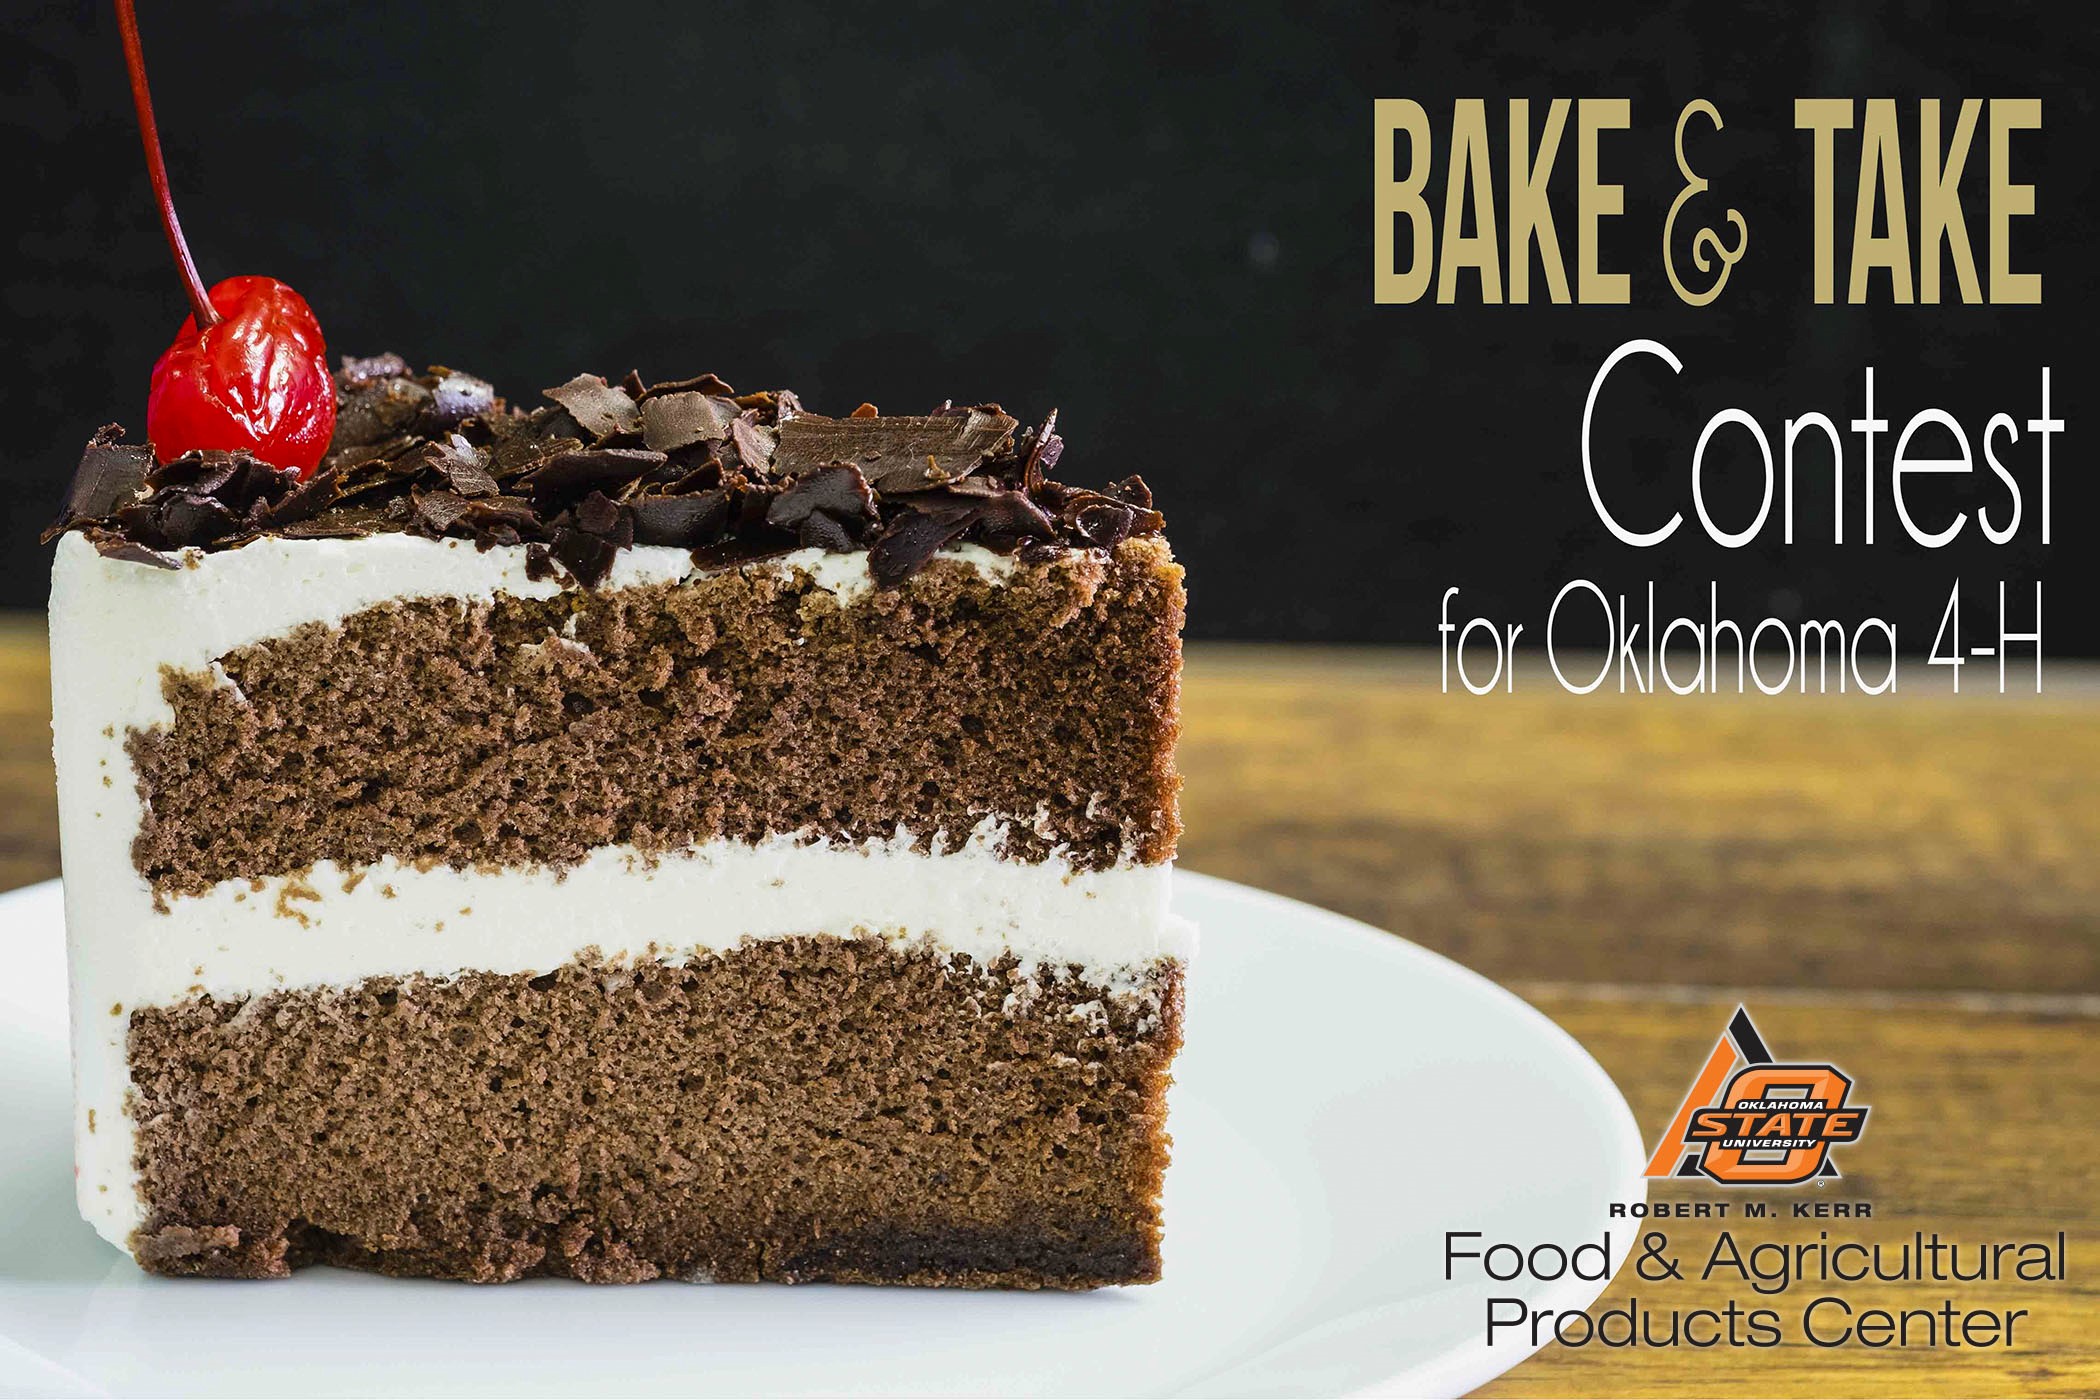 Oklahoma State University's FAPC Hosts Contest to Promote Bake and Take Month in March